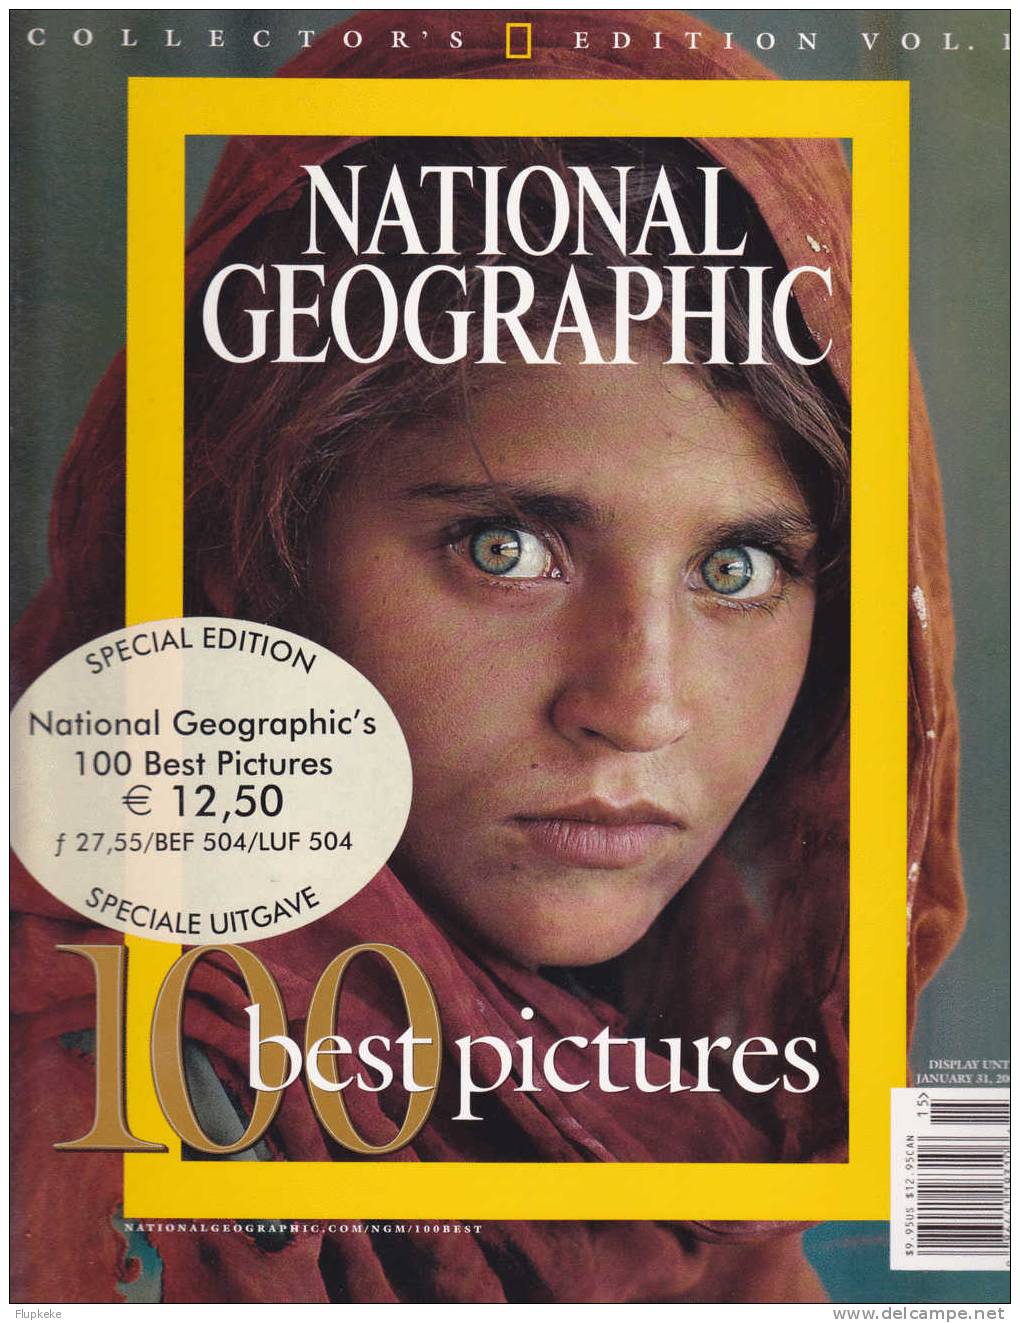 National Geographic Collector´s Edition Vol. 1 Jannuary 2002 - Travel/ Exploration